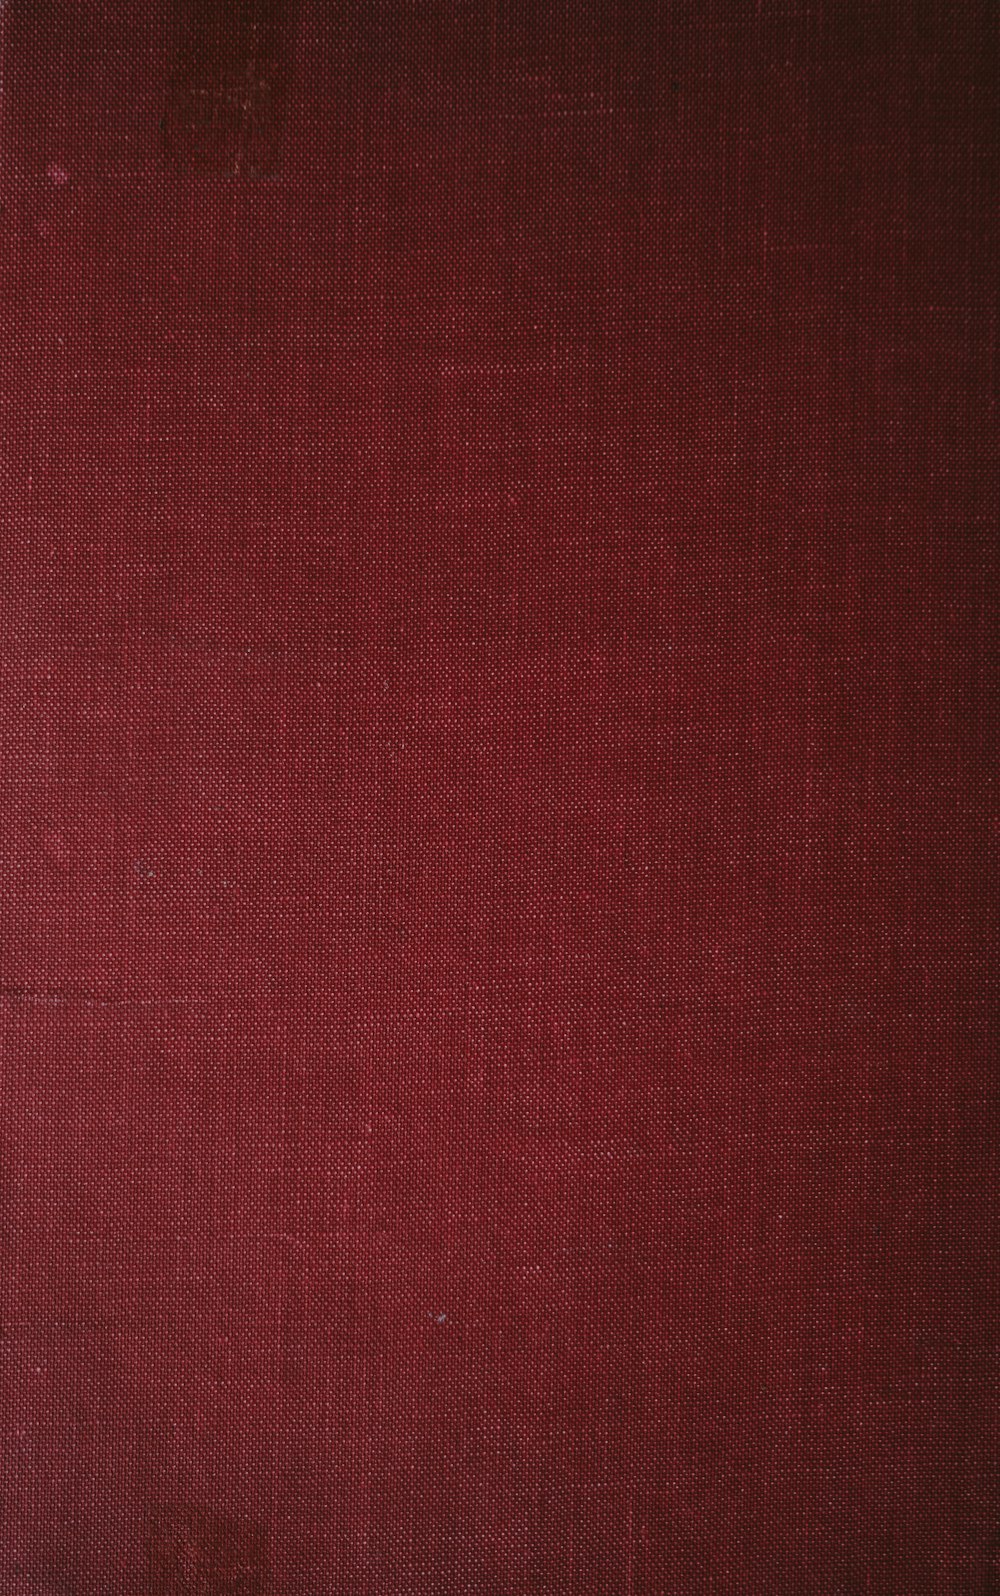 Red Fabric Pictures  Download Free Images on Unsplash